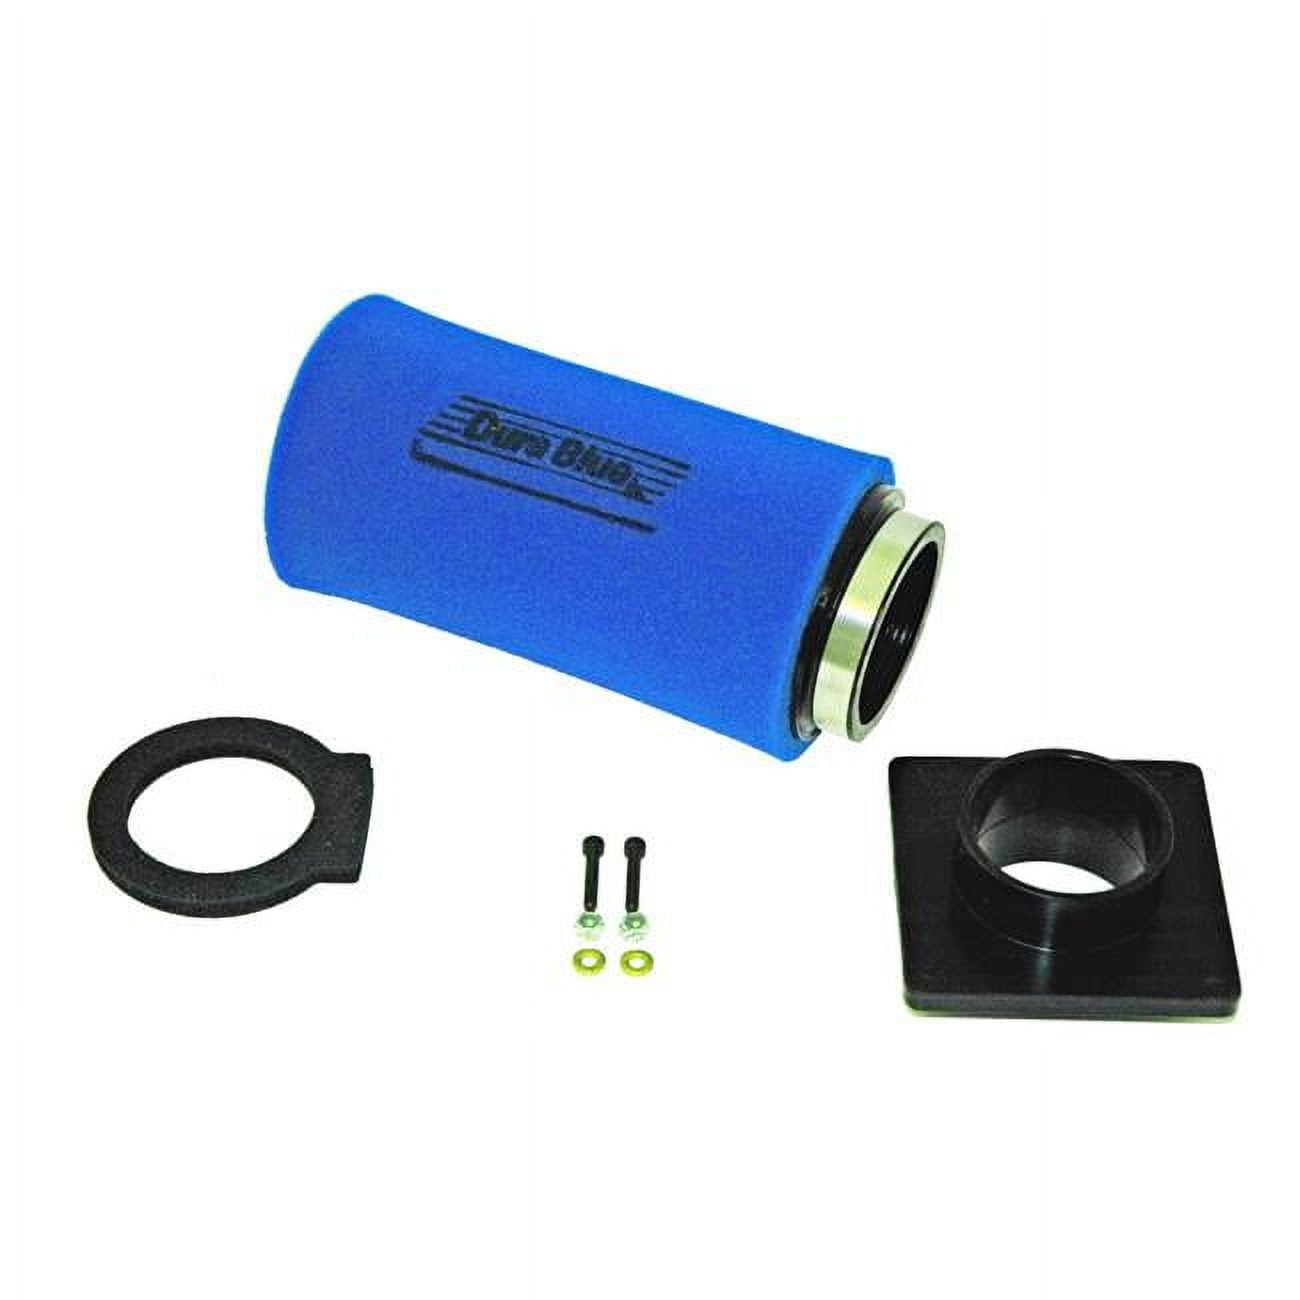 Picture of Durablue 1955k Air Filter - Power Yamaha Raptor 700 2006-2017-Kit - Clamp-on Filter & Mounting Plate